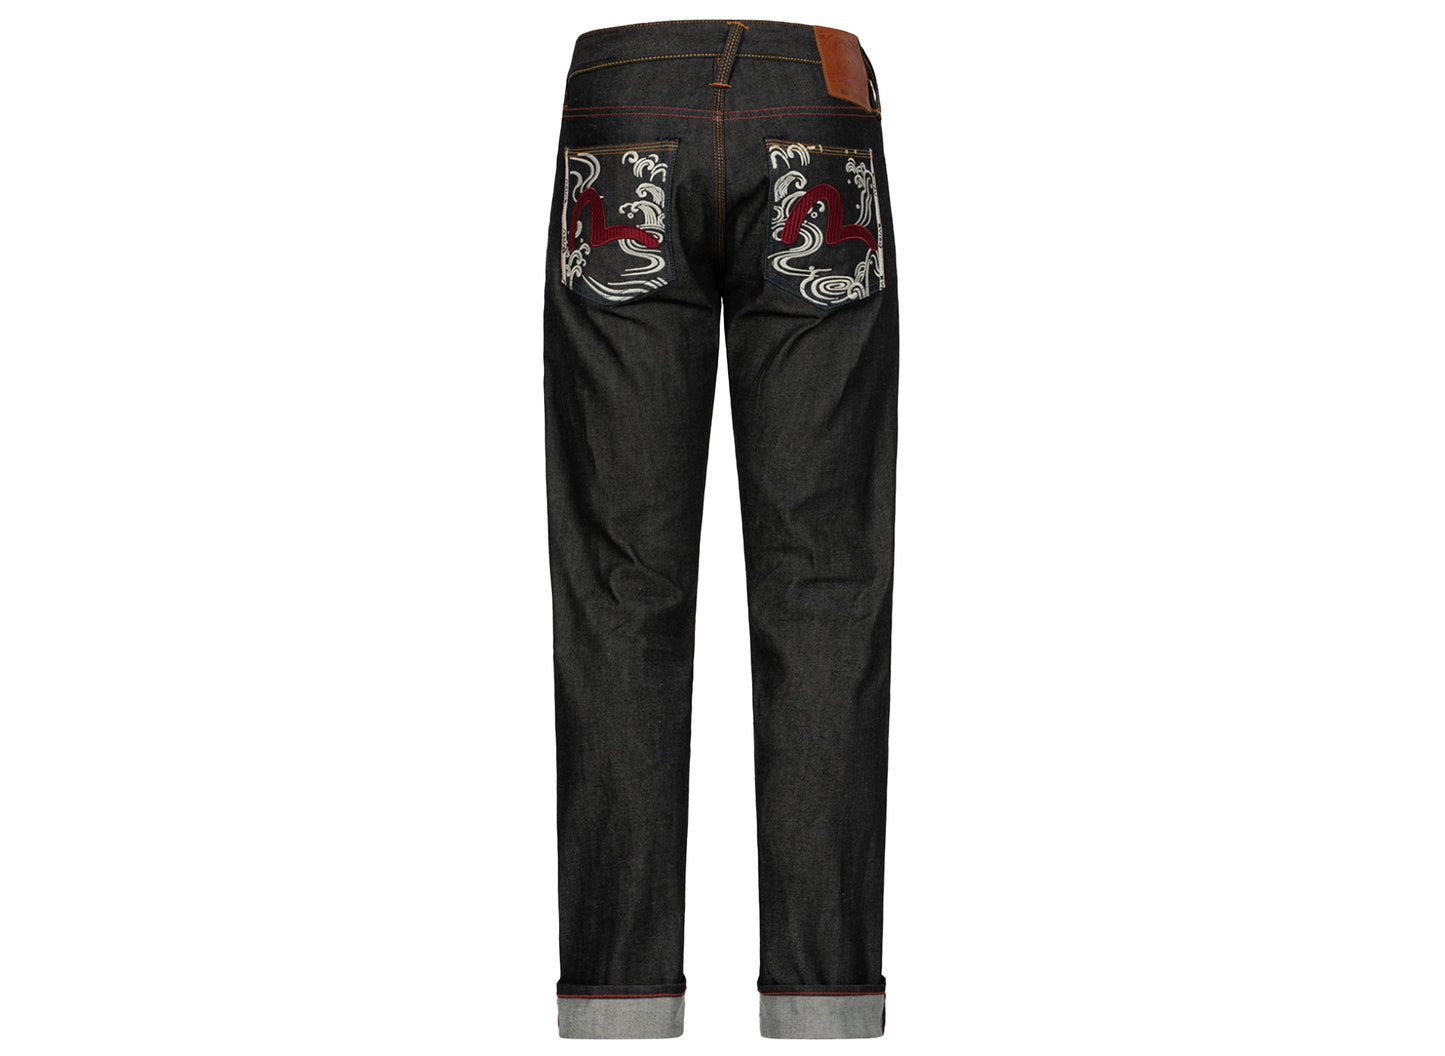 Evisu Seagull Textured Embroidery Slim Fit Jeans